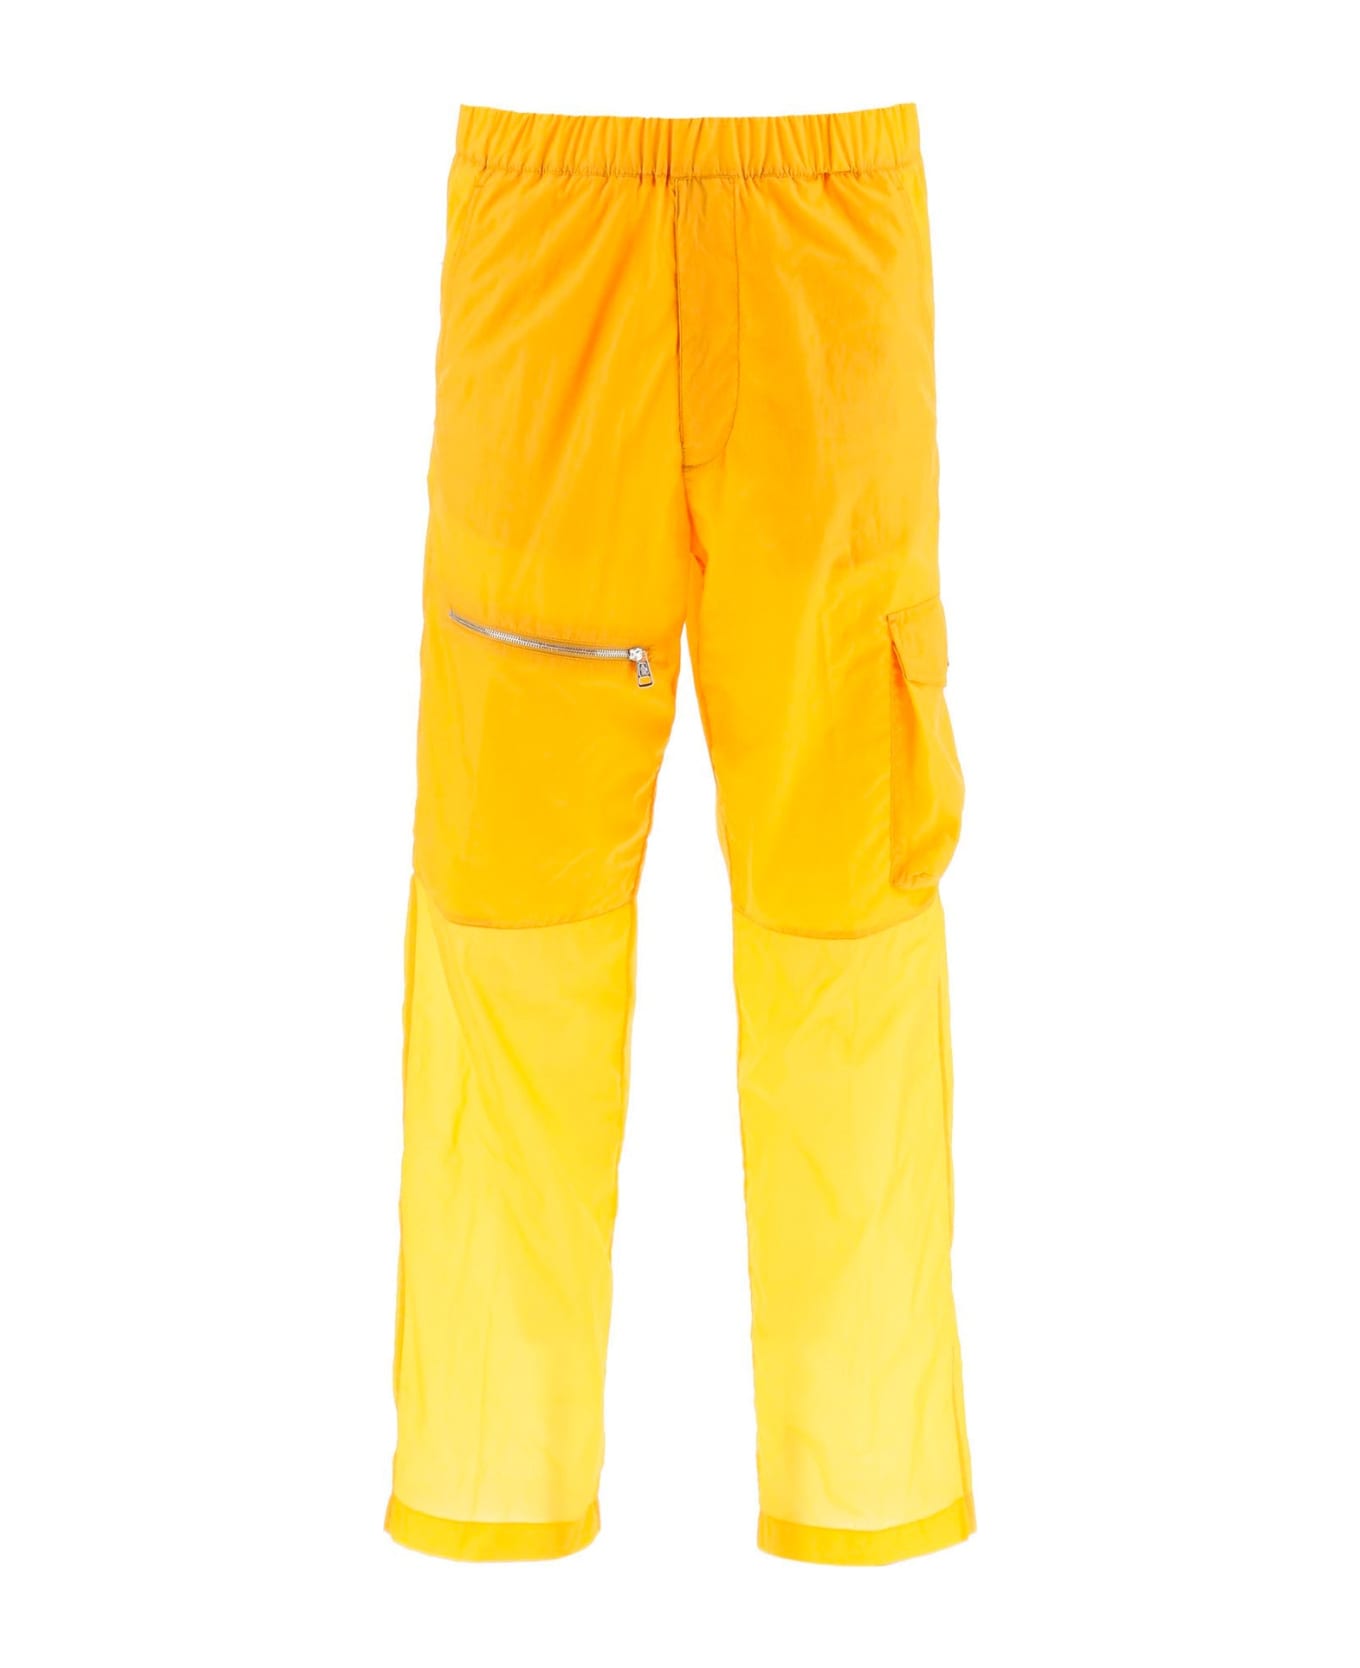 Moncler Genius Genius Hot Lightweight Cady Trousers - Yellow